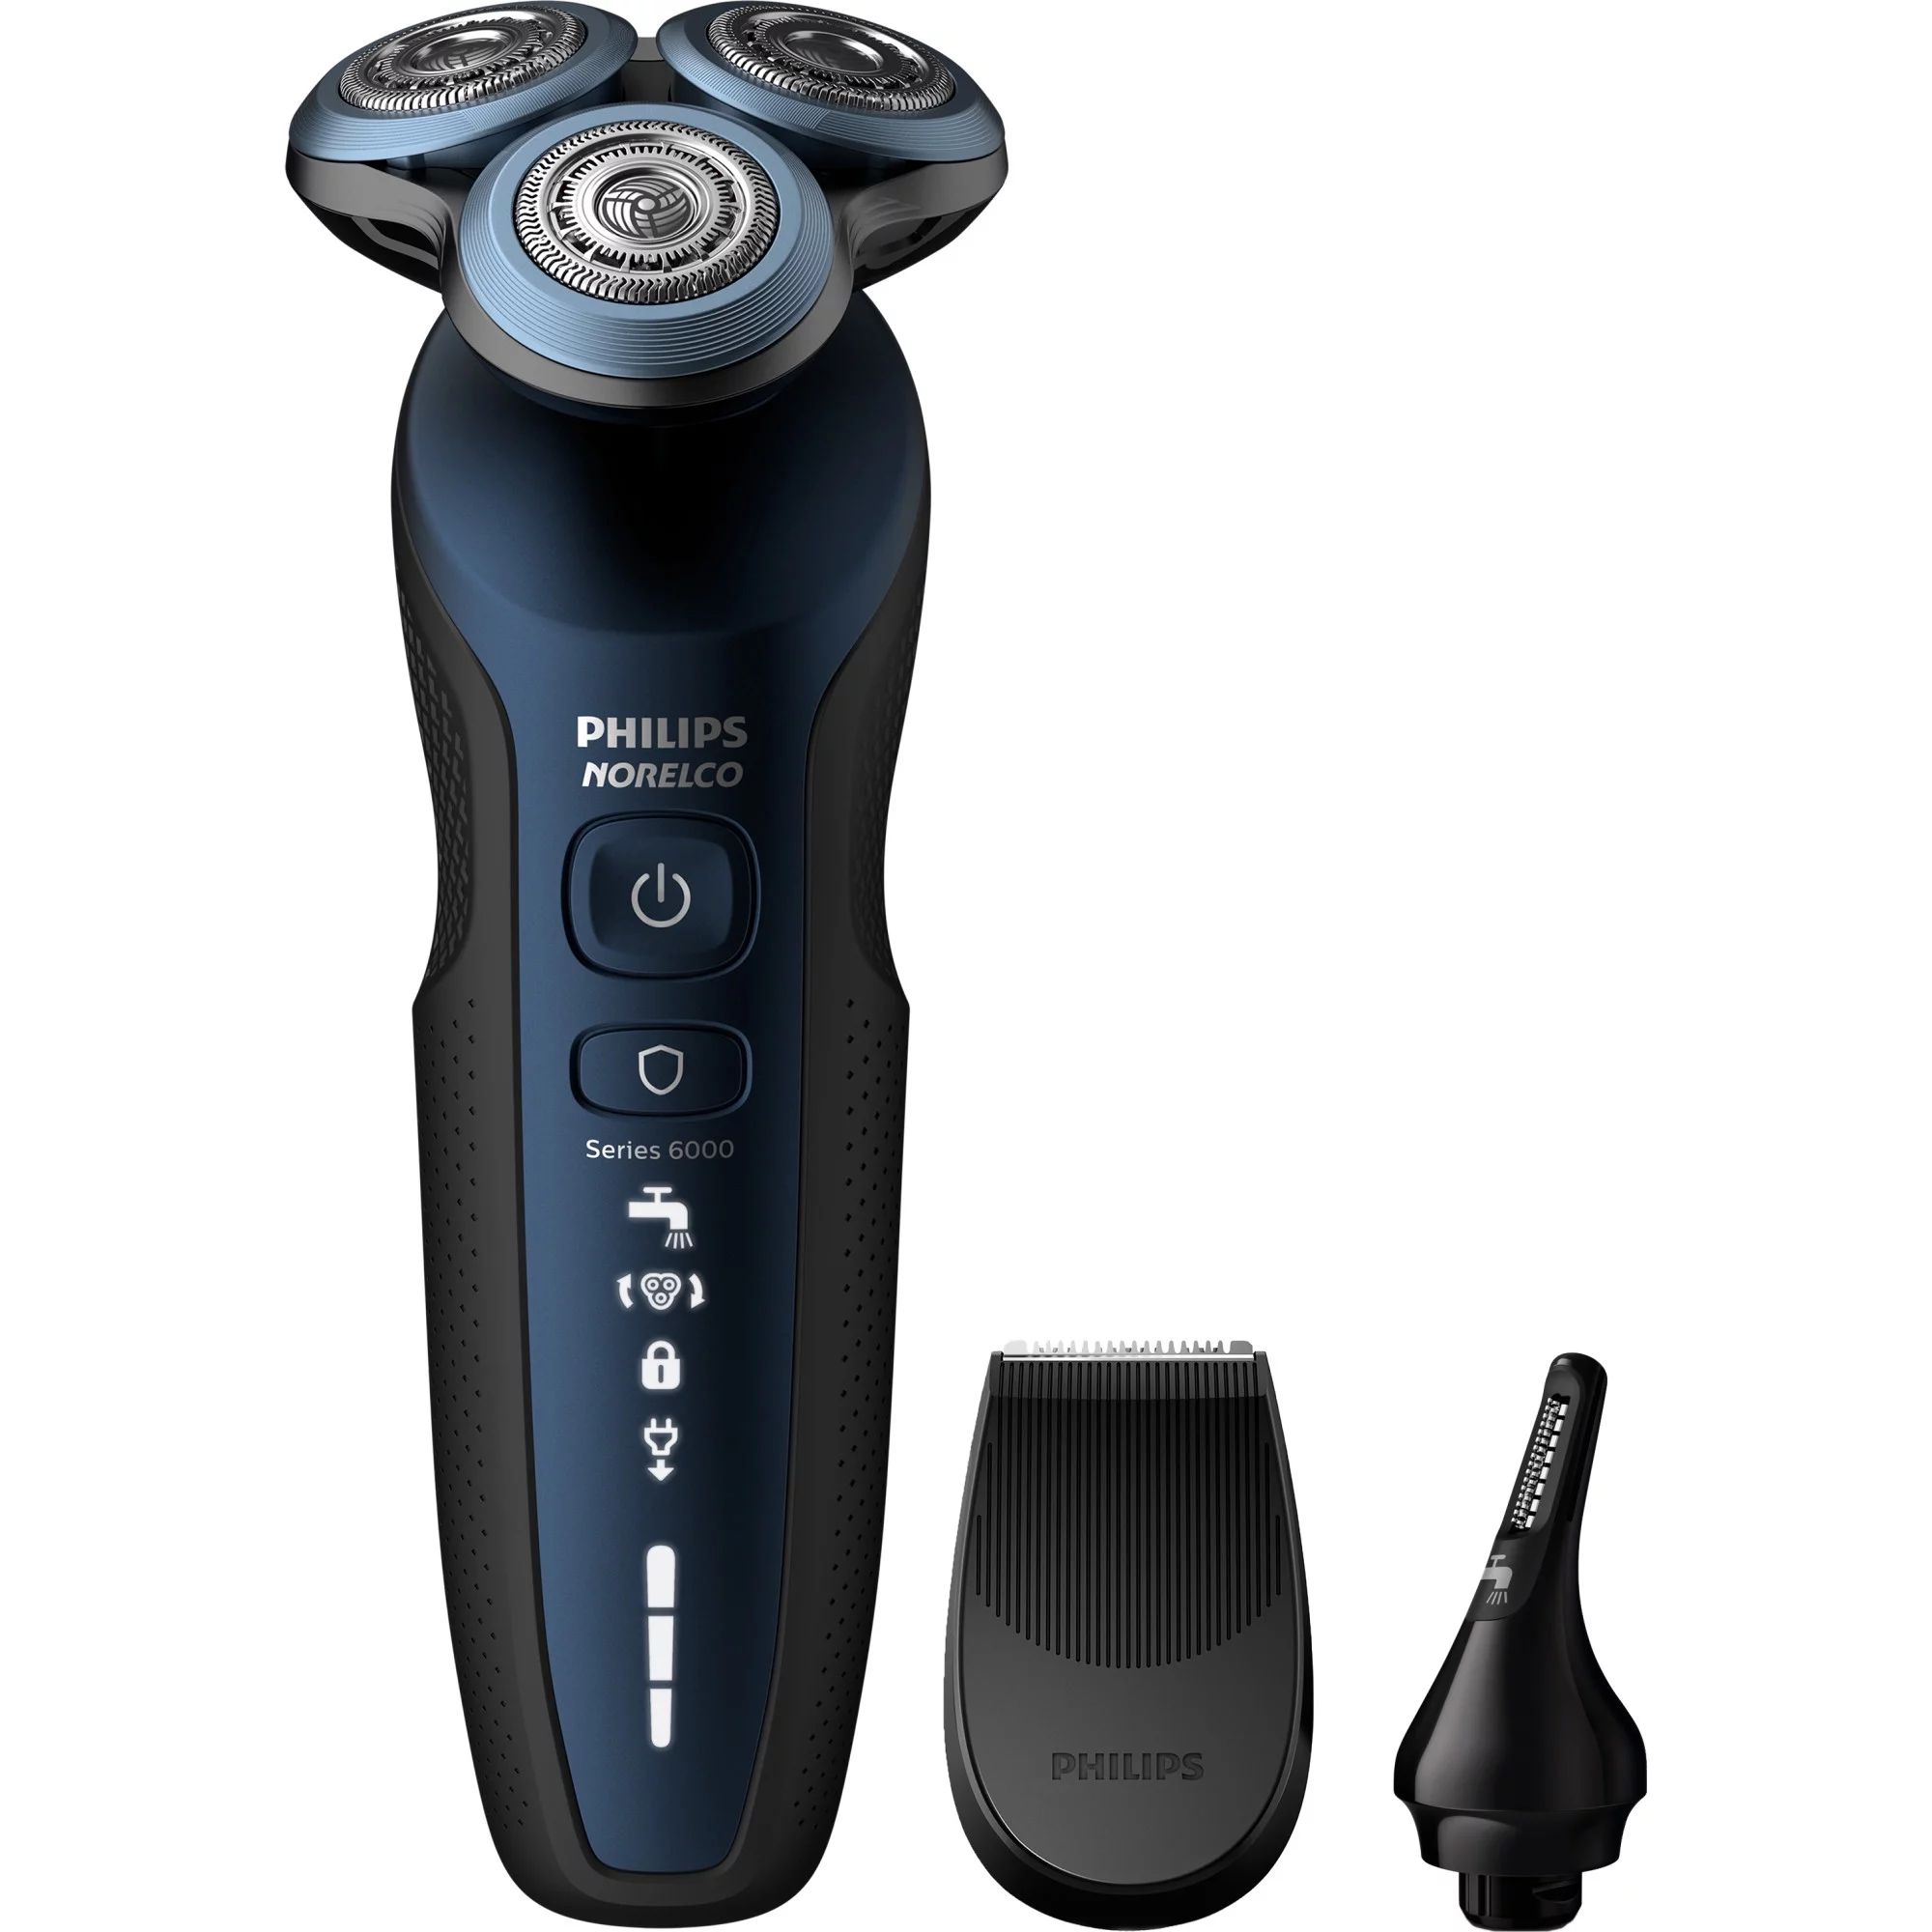 Philips Norelco Electric Shaver 6850 with Precision Trimmer and Nose Trimmer Attachment, S6850/85 | Walmart (US)